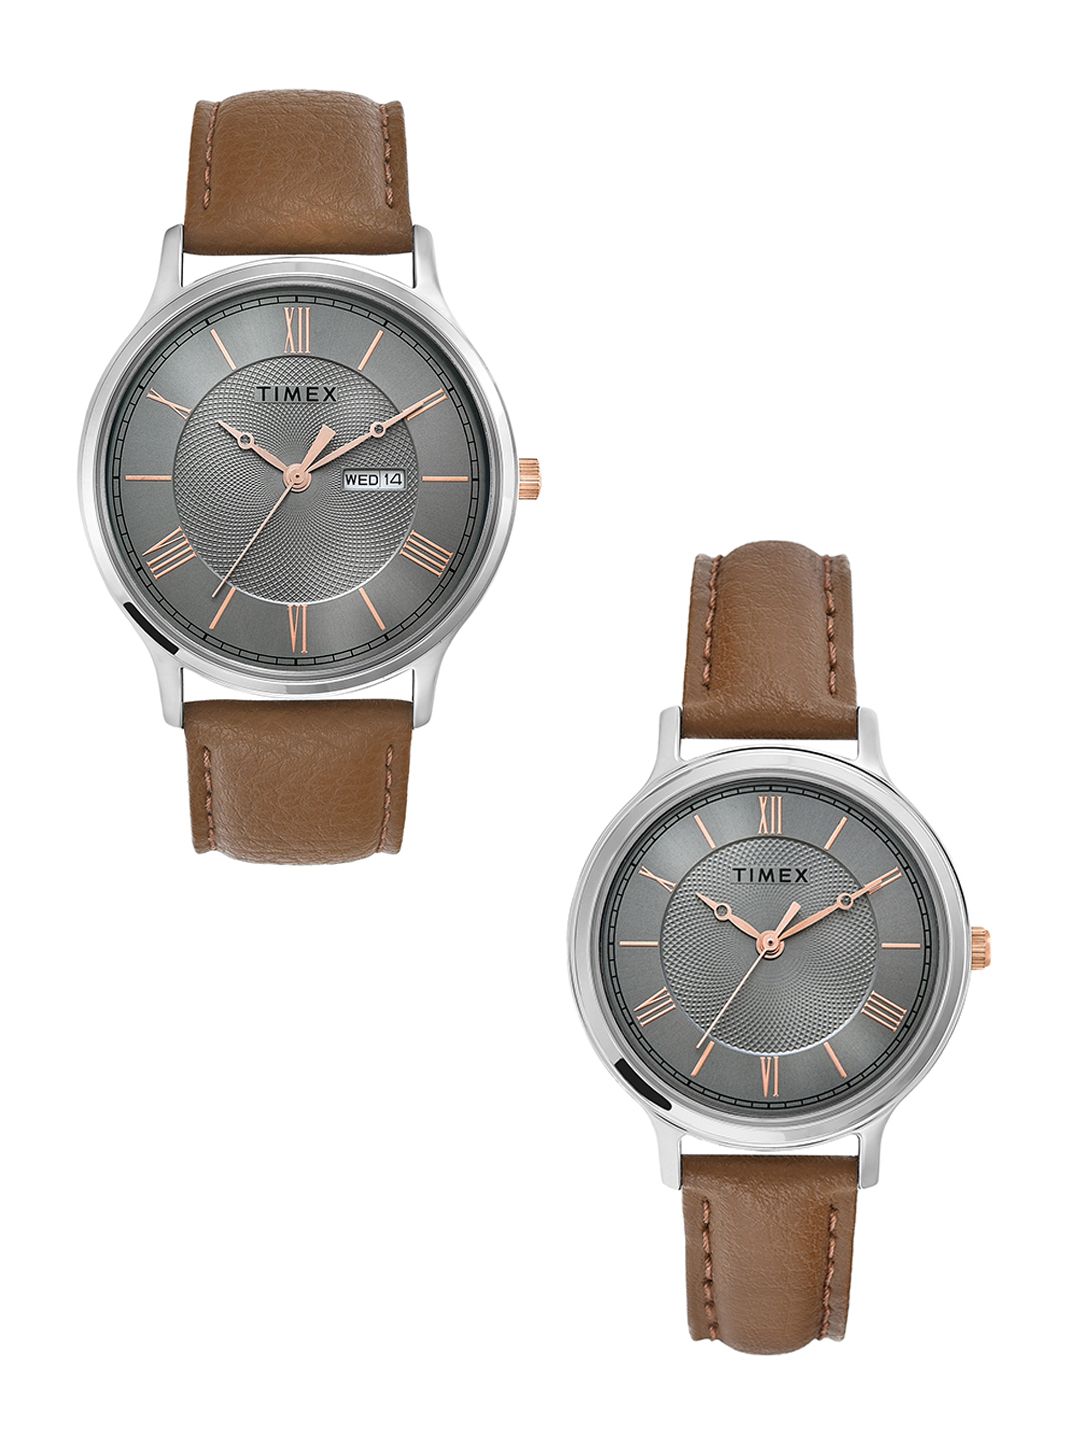 Timex Unisex Leather Straps Analogue His and Her Watches TW00PR300